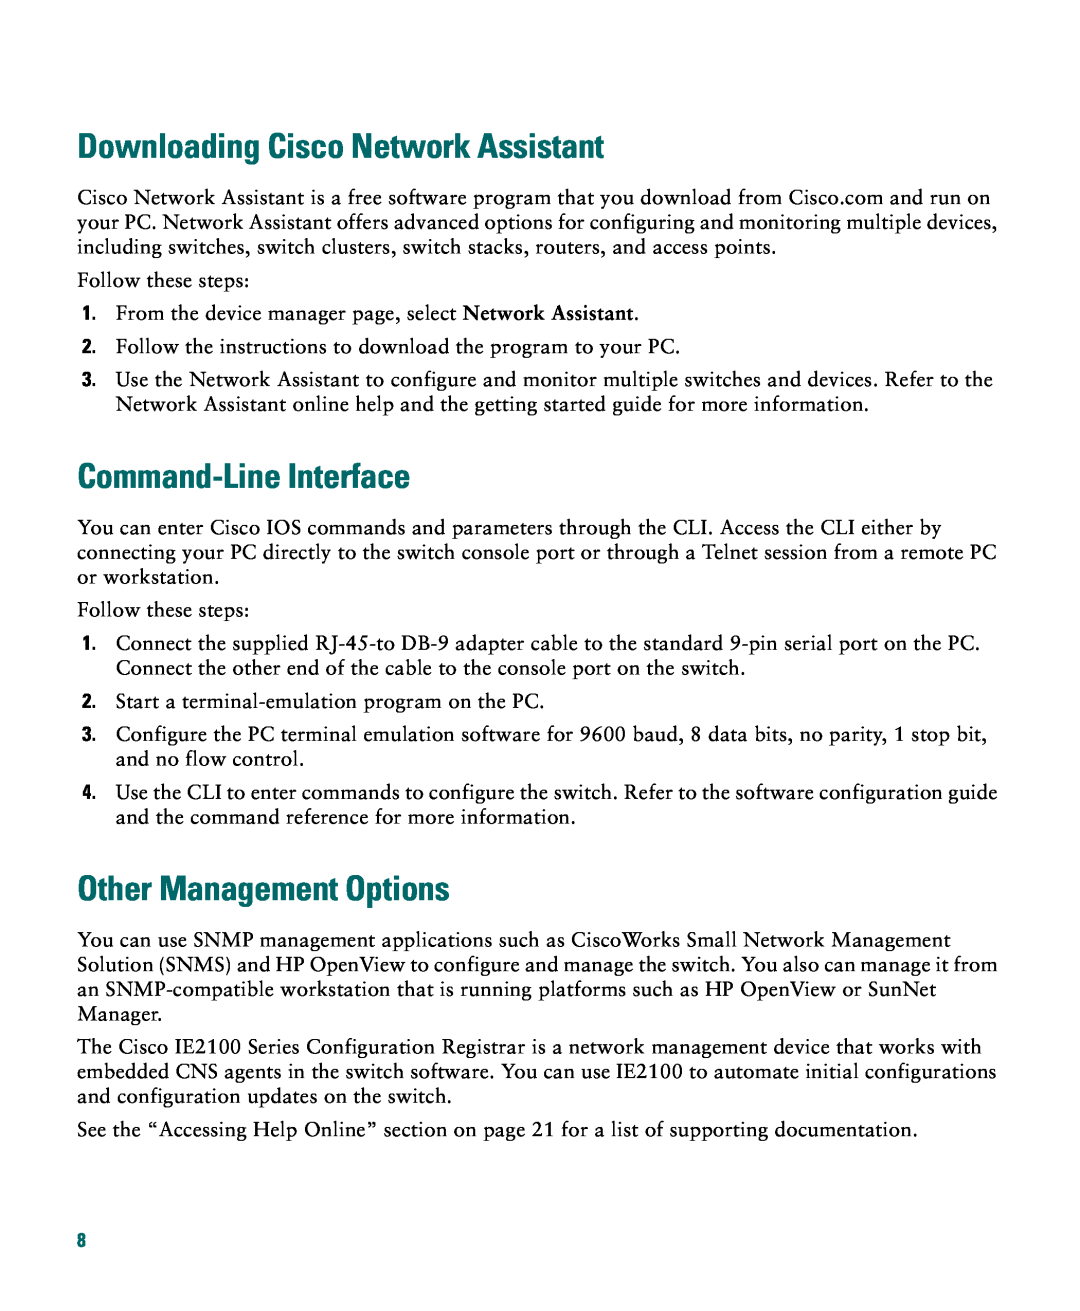 Cisco Systems Catalyst 3550 warranty Downloading Cisco Network Assistant, Command-Line Interface, Other Management Options 